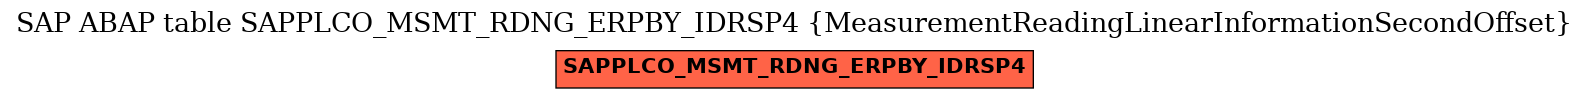 E-R Diagram for table SAPPLCO_MSMT_RDNG_ERPBY_IDRSP4 (MeasurementReadingLinearInformationSecondOffset)